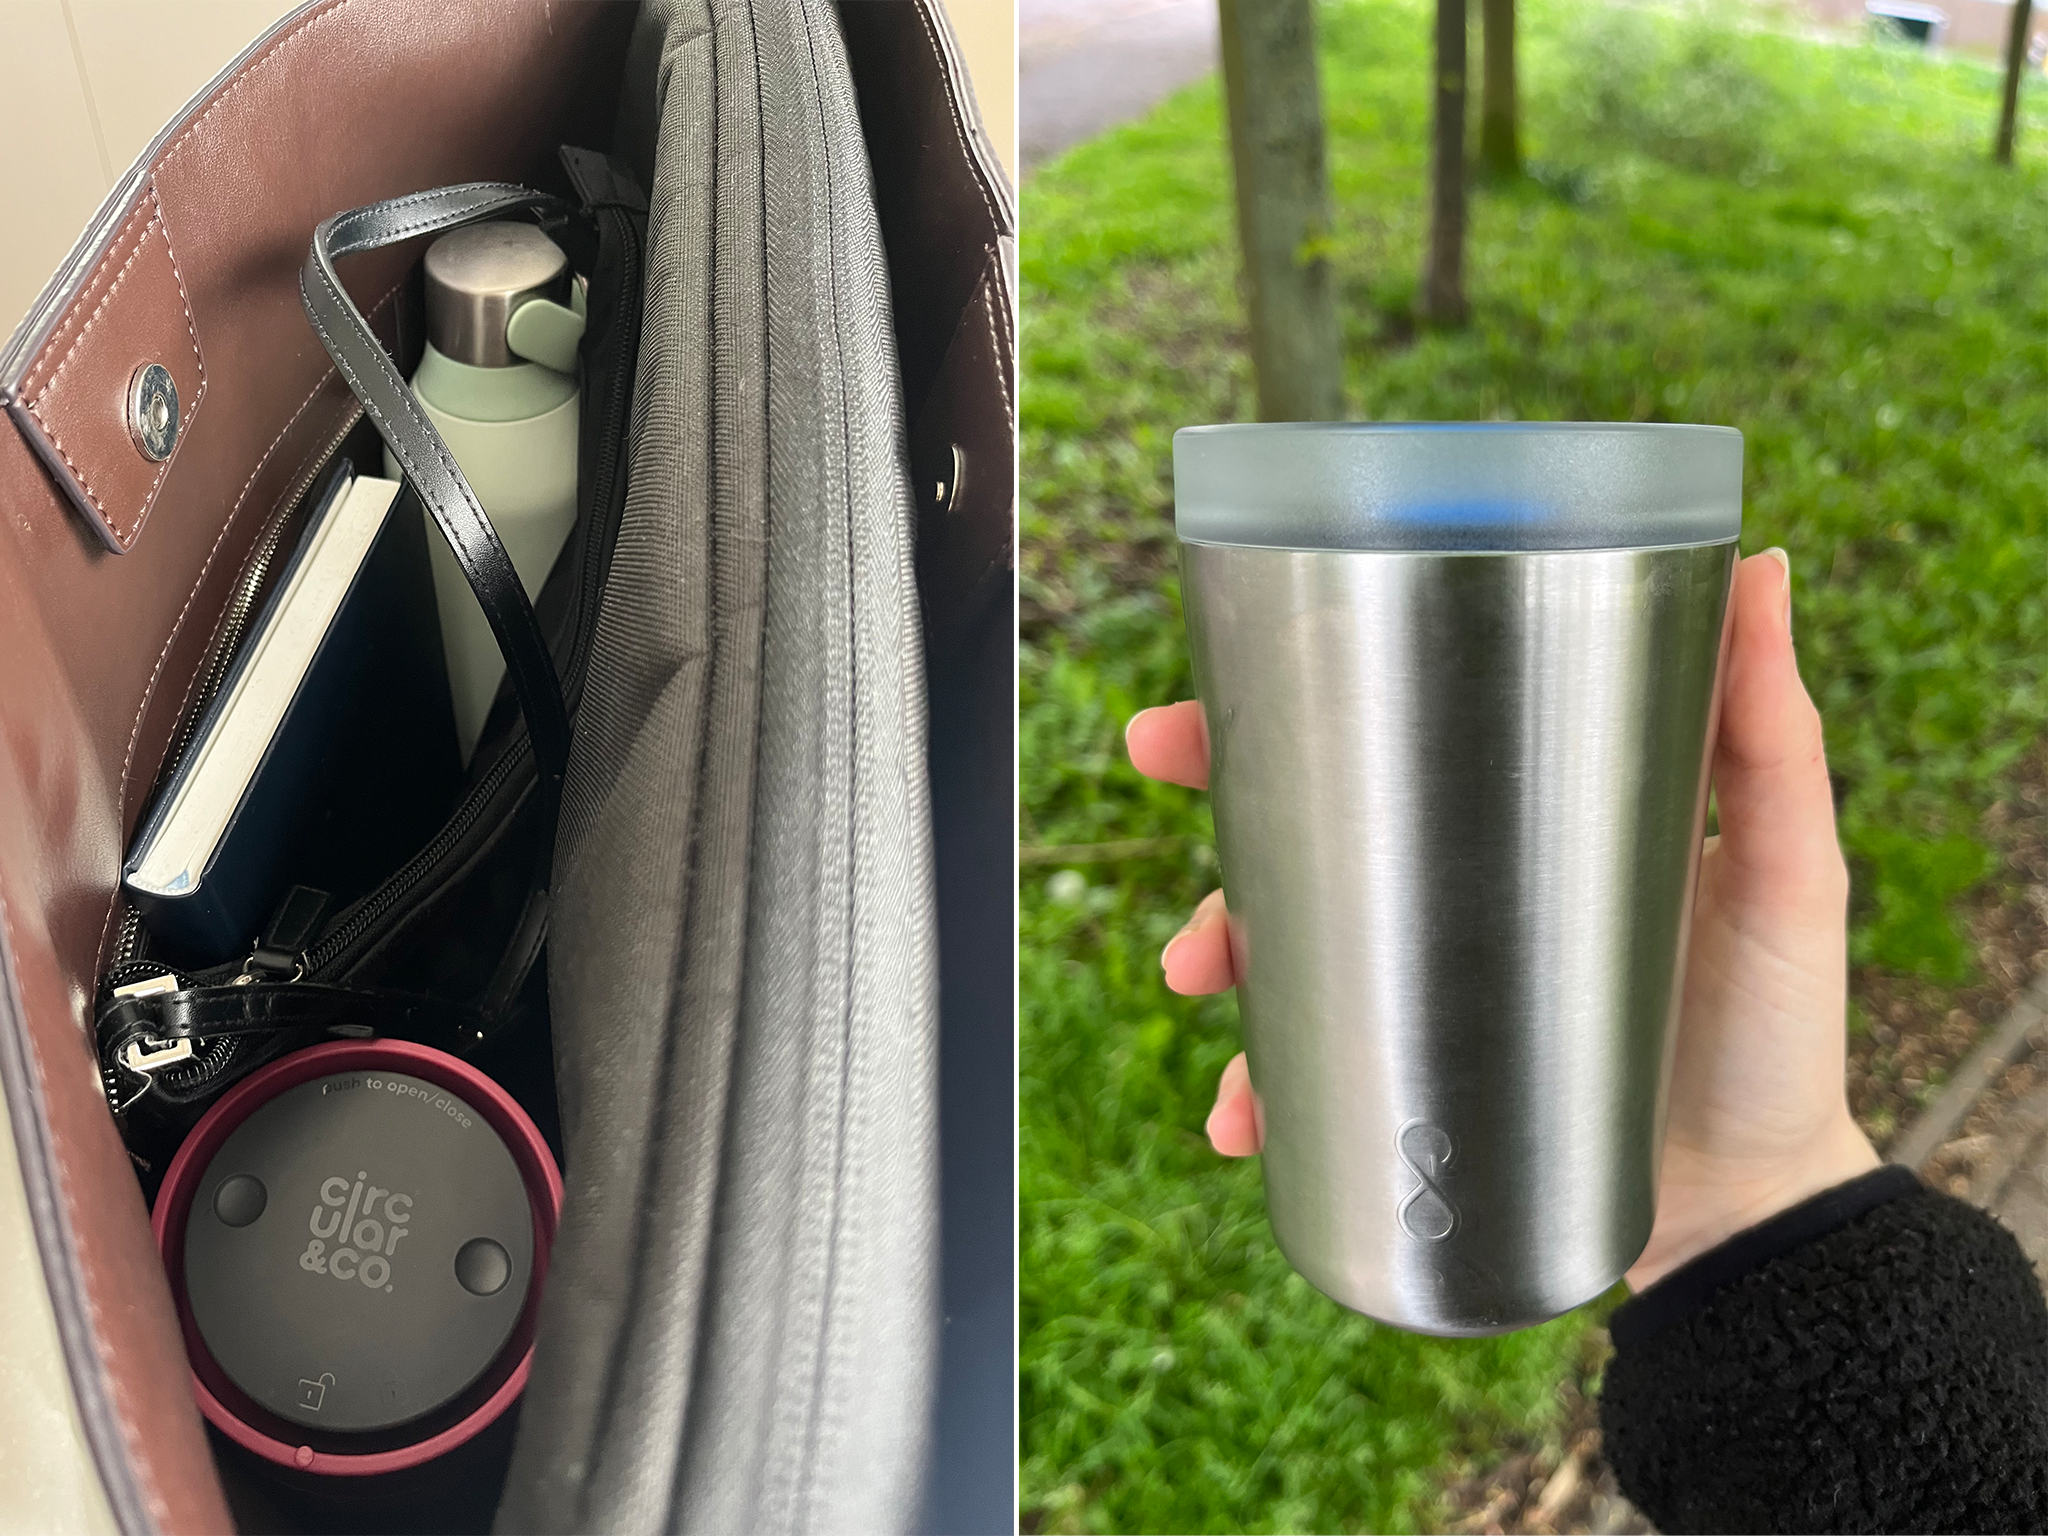 We put a range of reusable coffee cups to the test